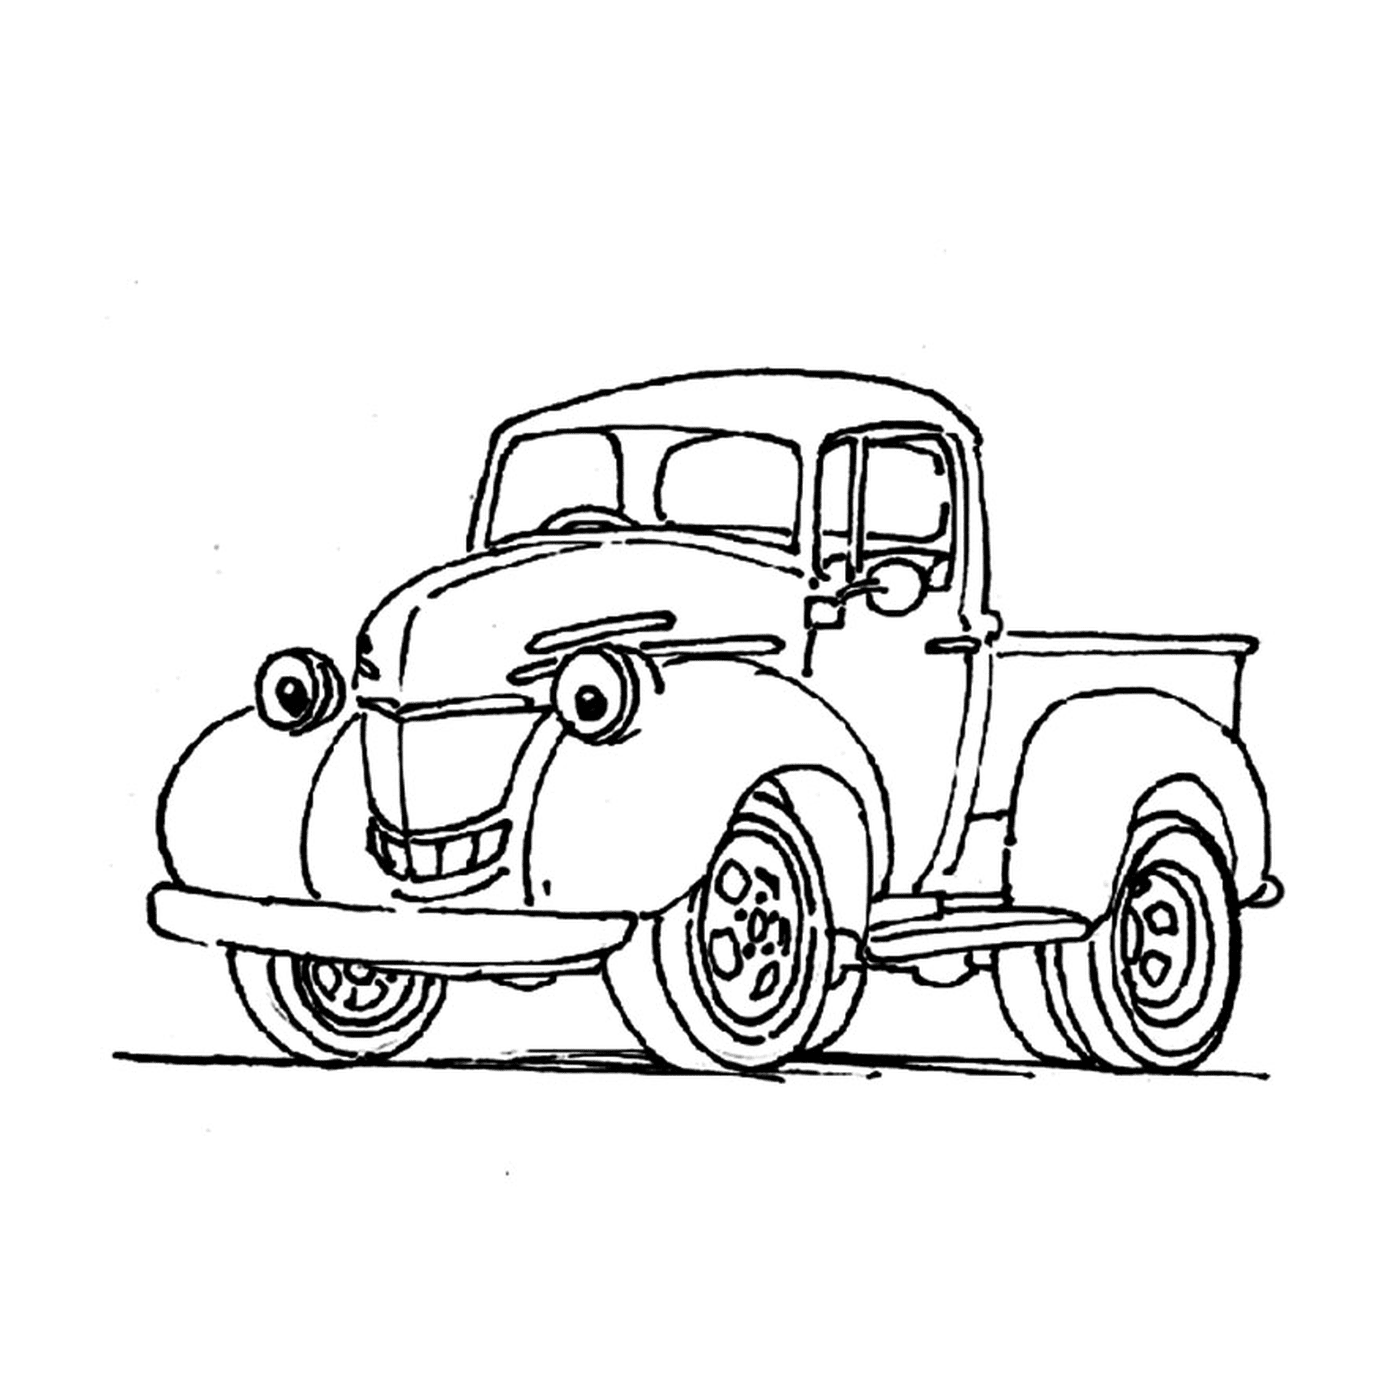  Old truck with a smiling face drawn on the side 